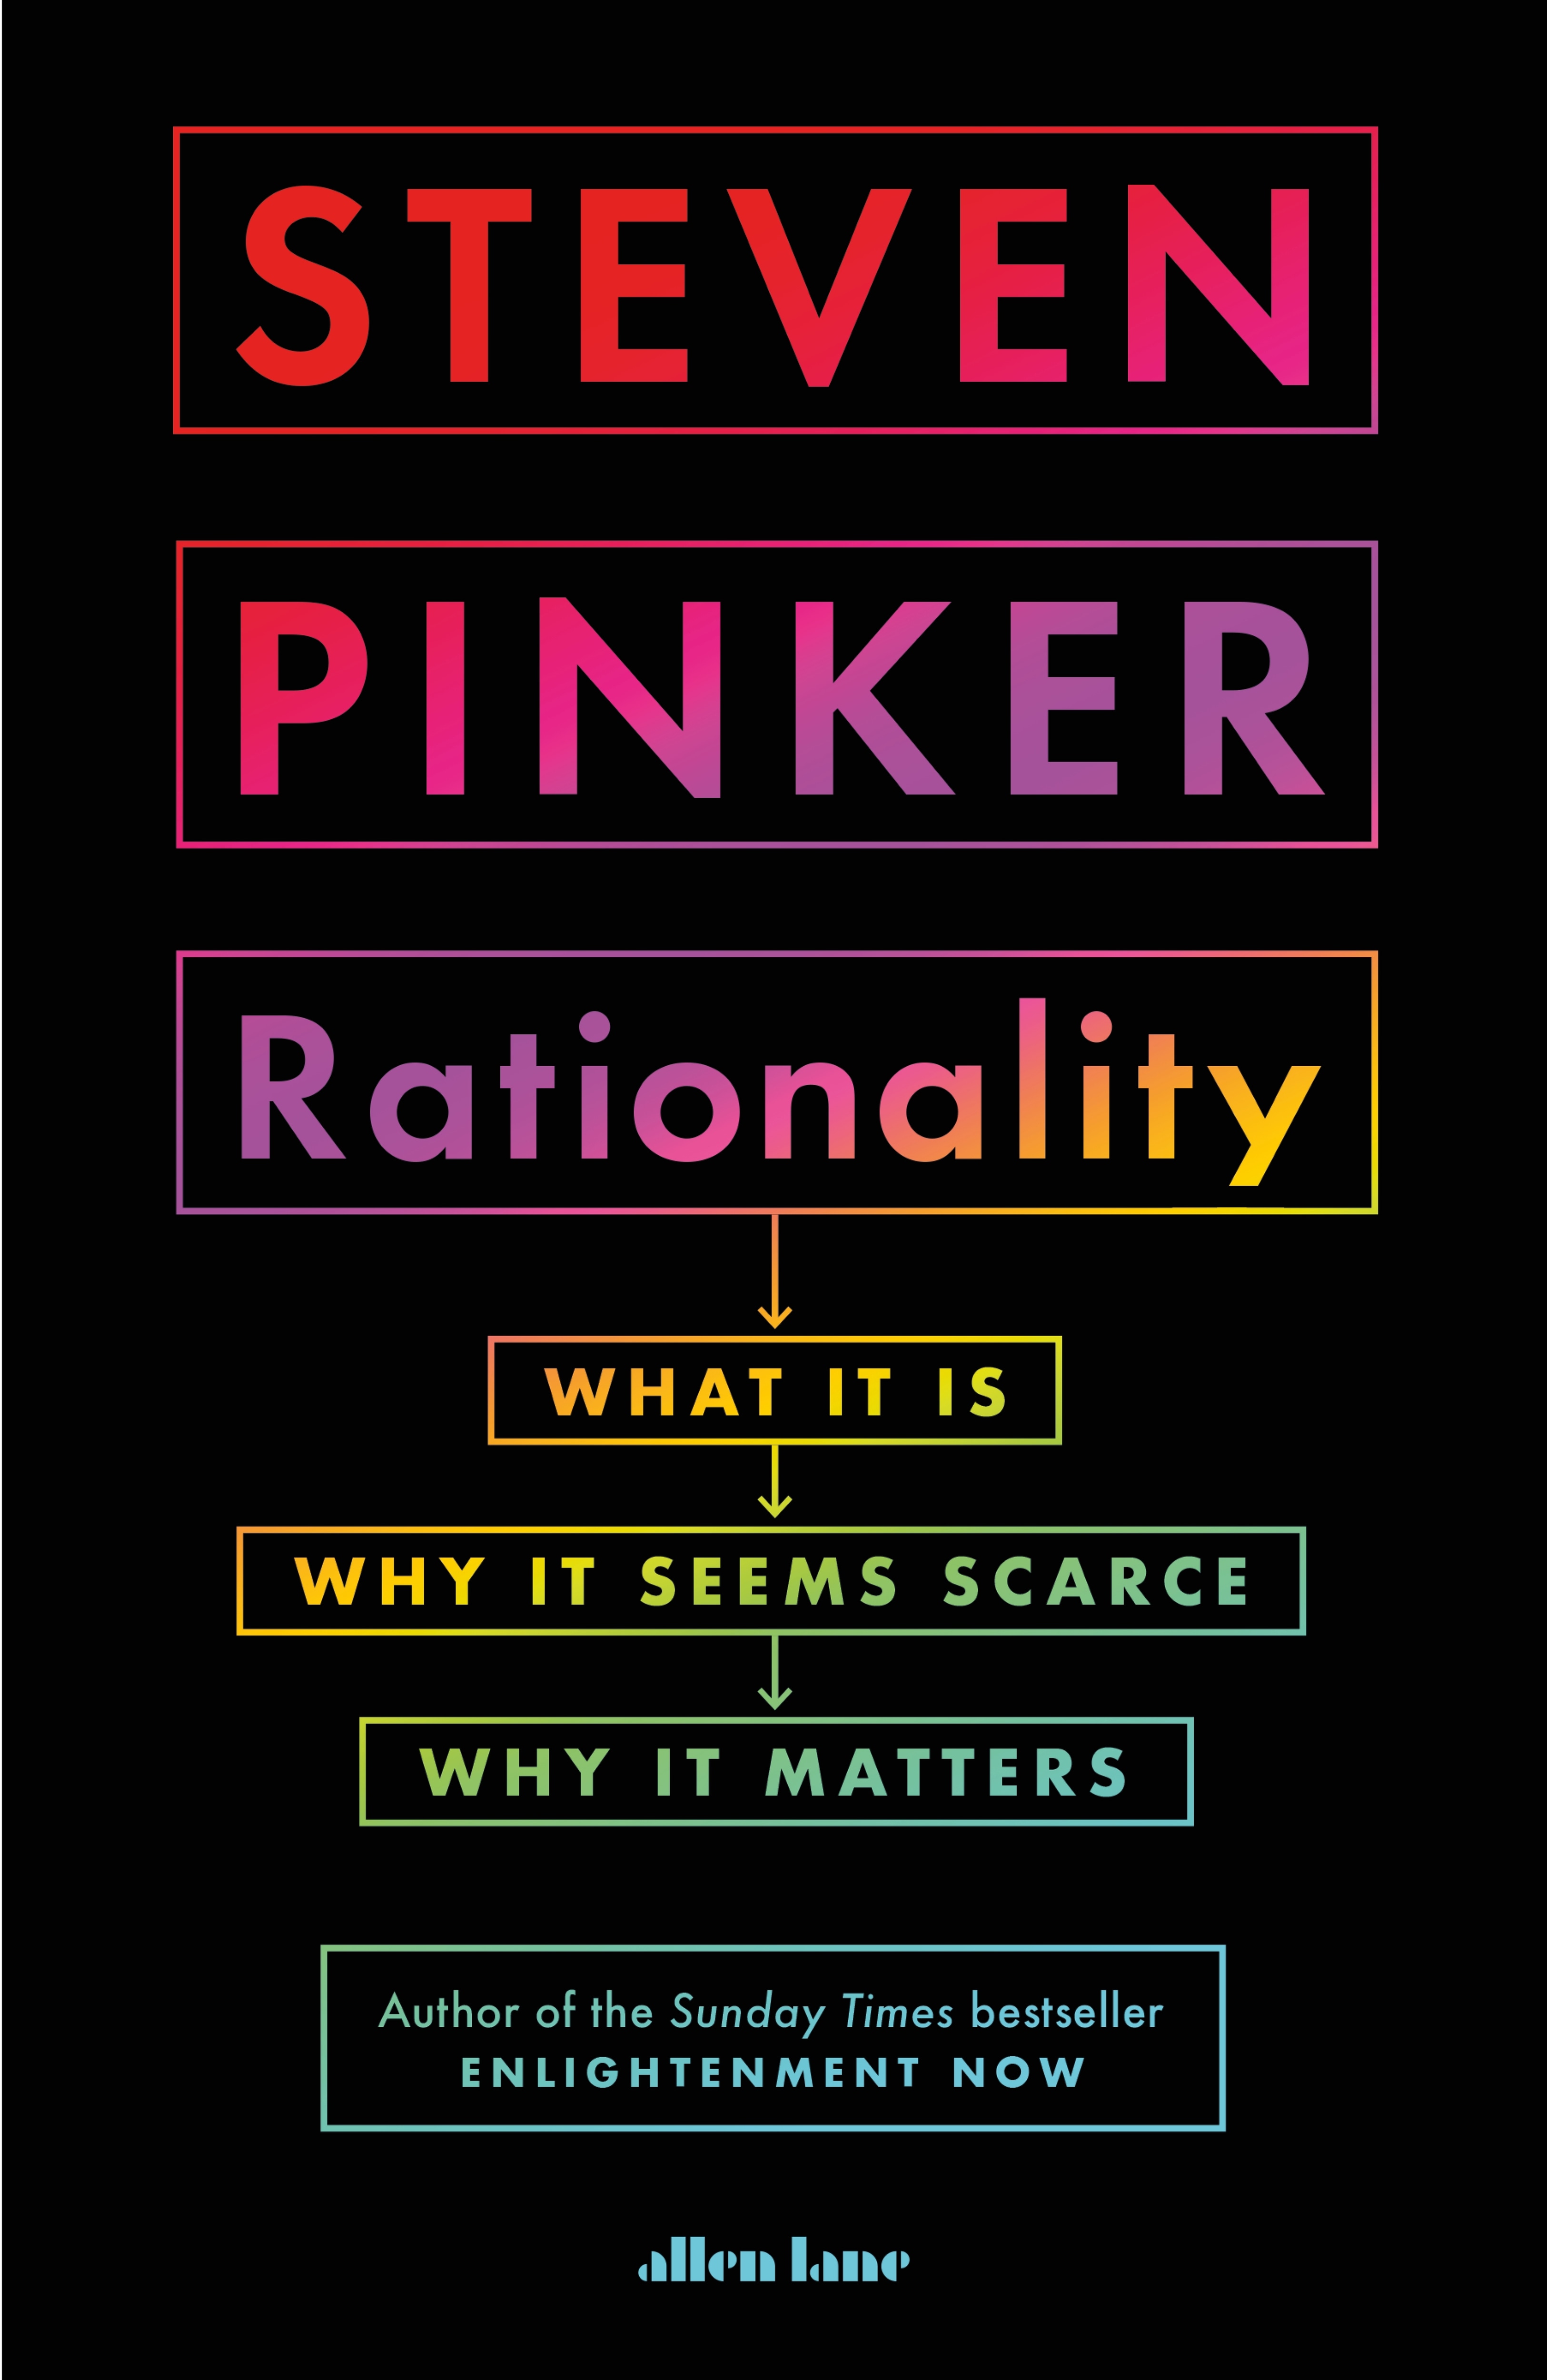 Book “Rationality” by Steven Pinker